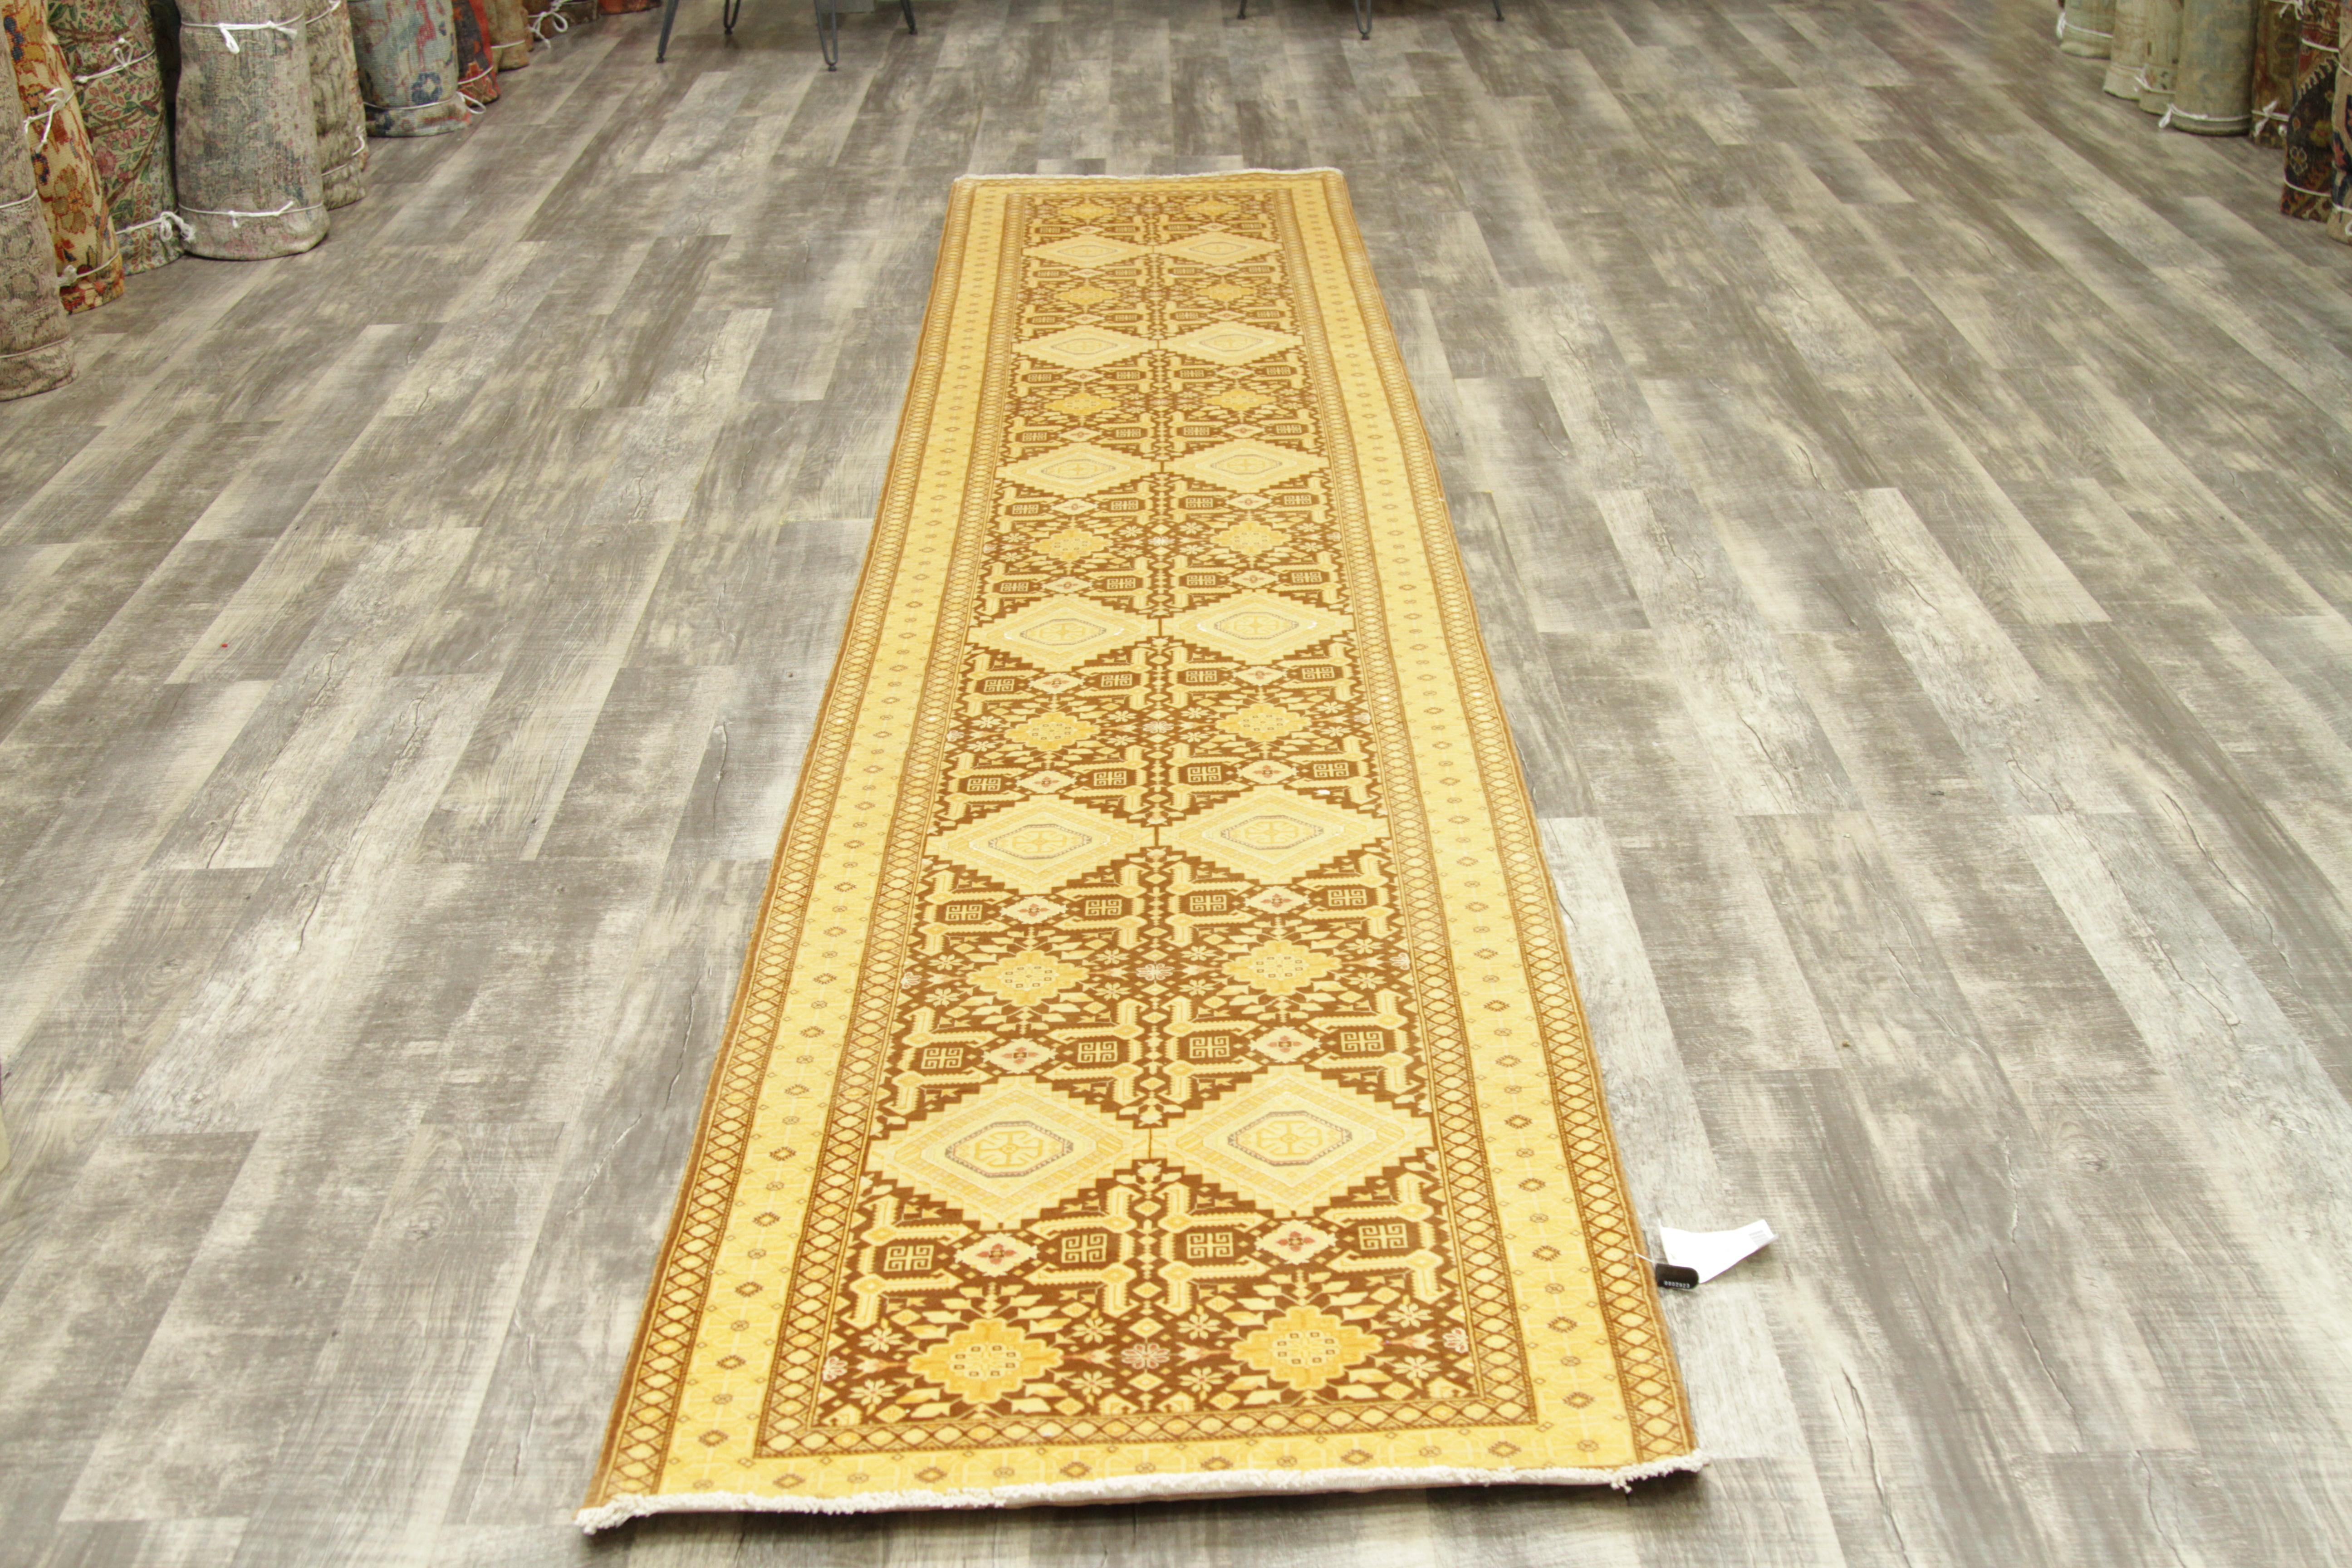 Antique Persian Rug in Tabriz Design with Gold & Brown Color Palette, circa 1940 For Sale 5